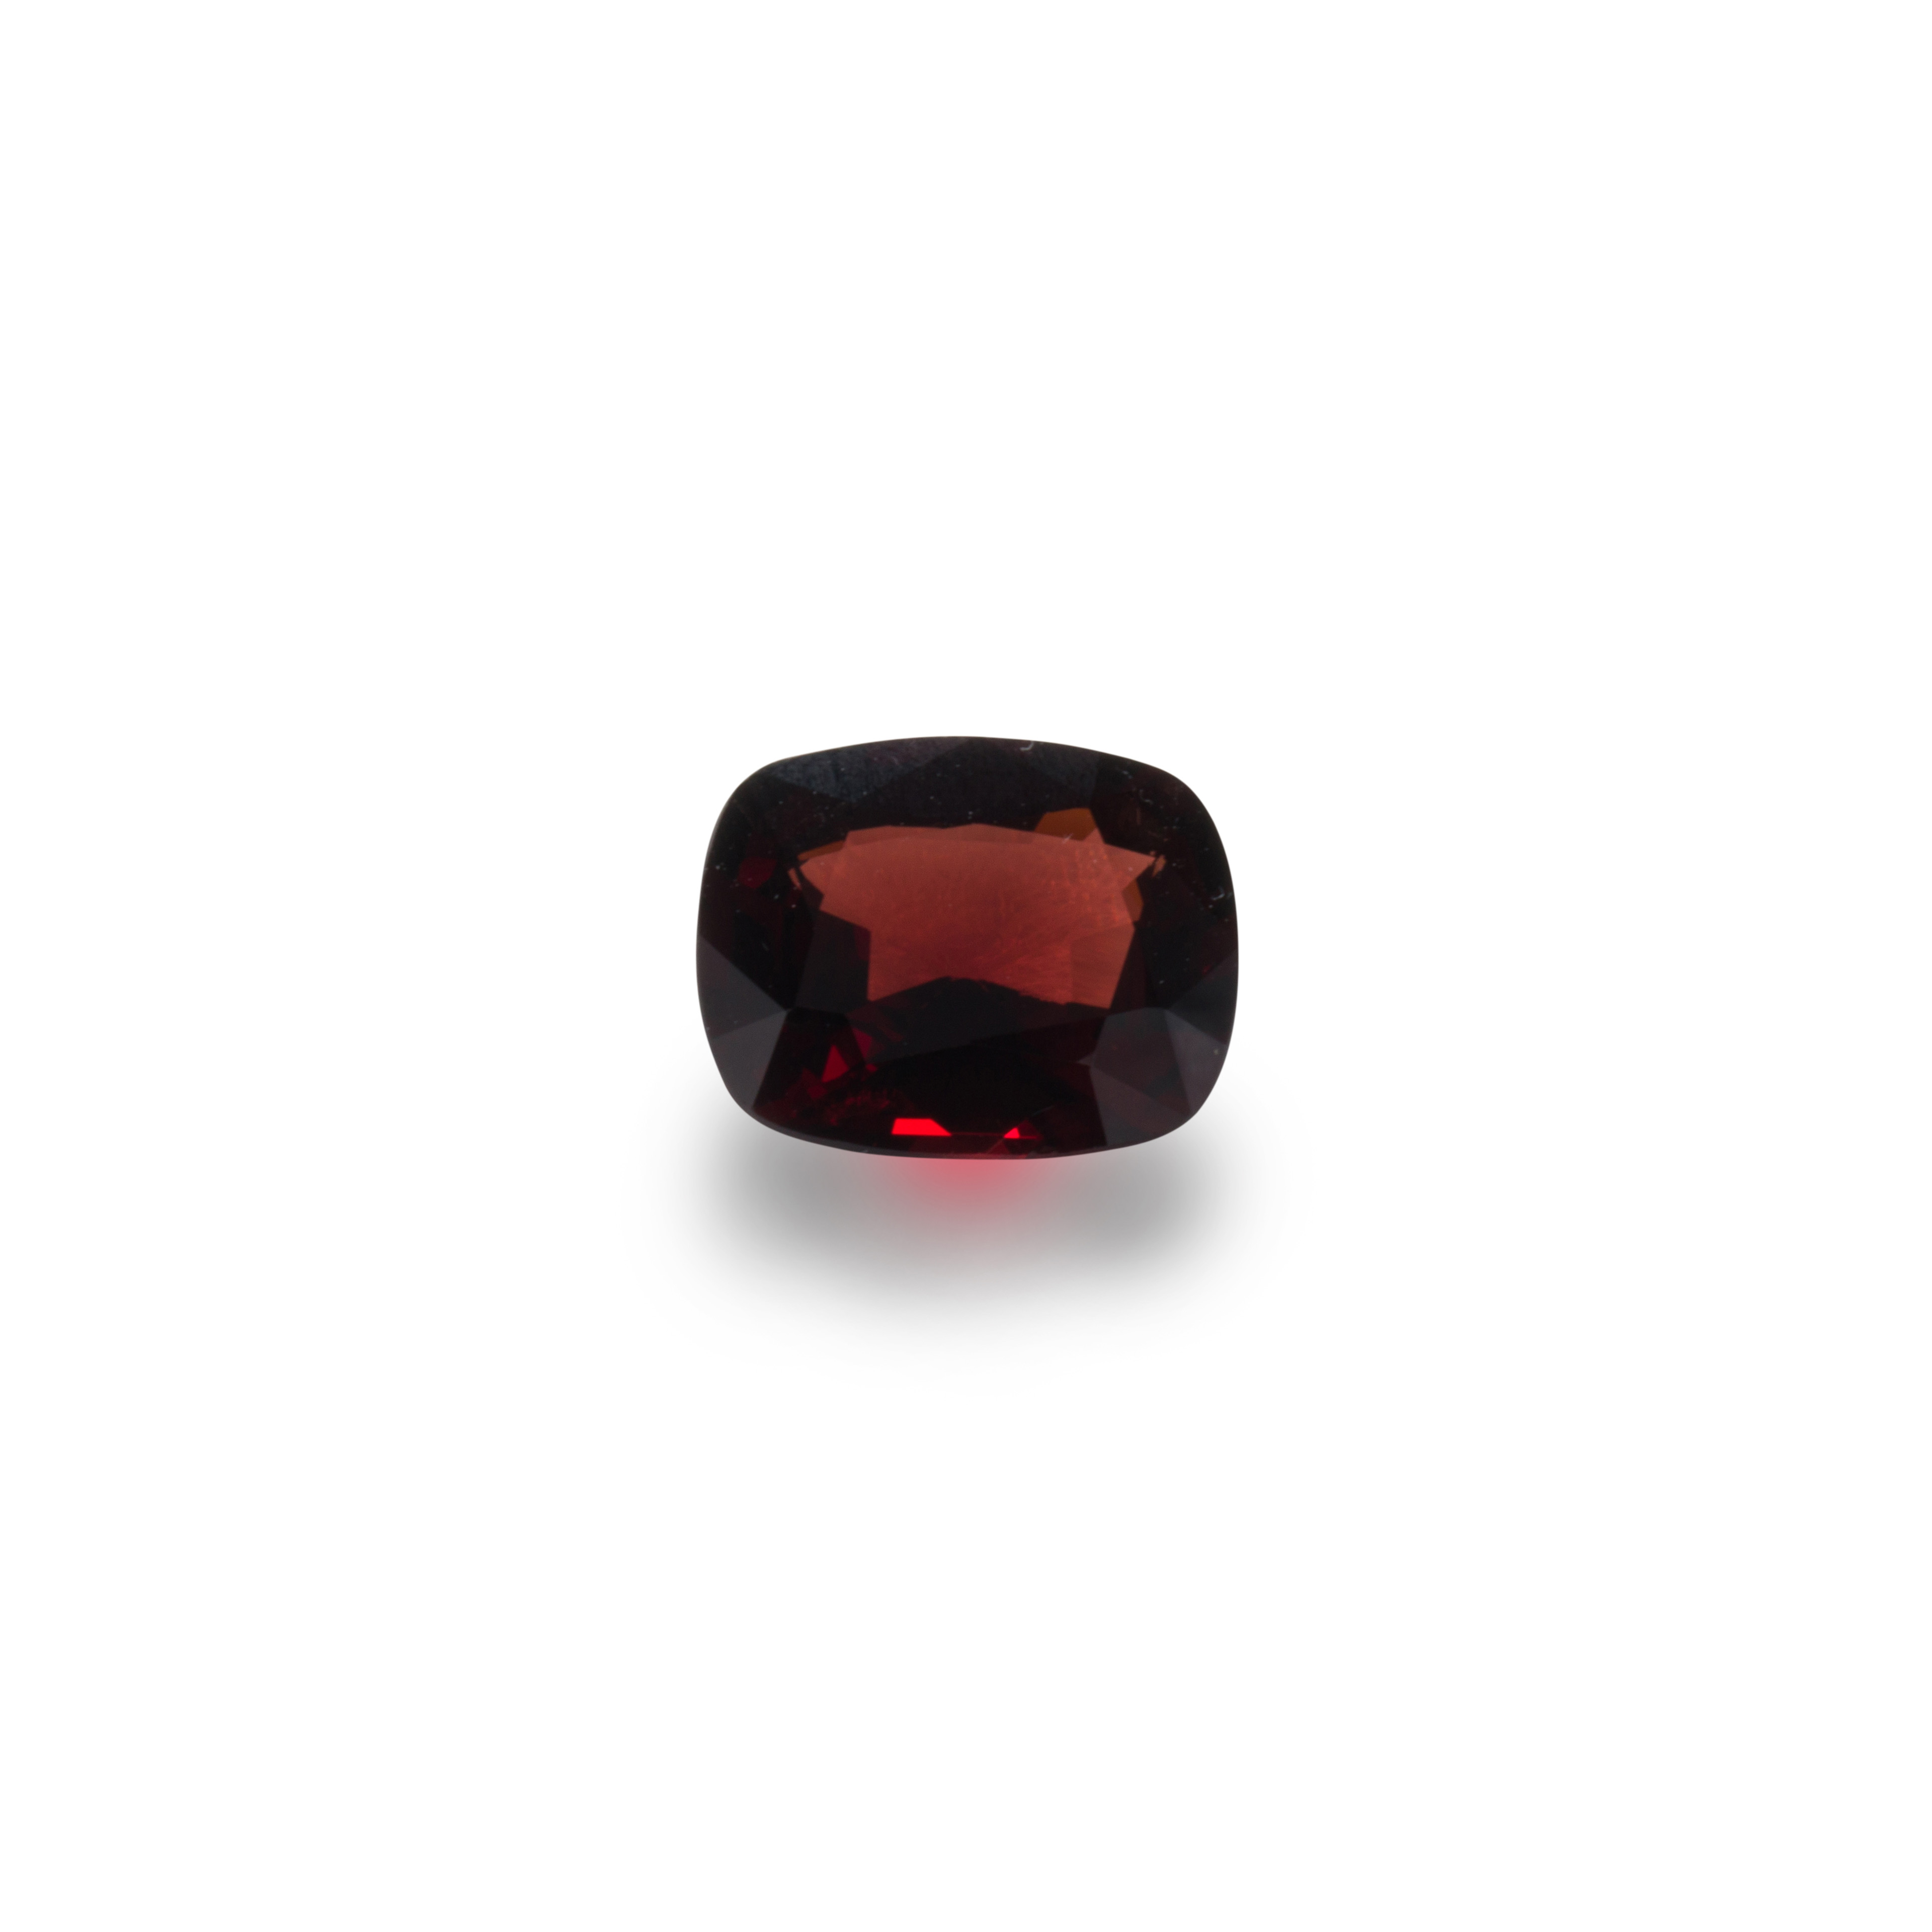 AN UNMOUNTED RED SPINEL An unmounted 3a4c25